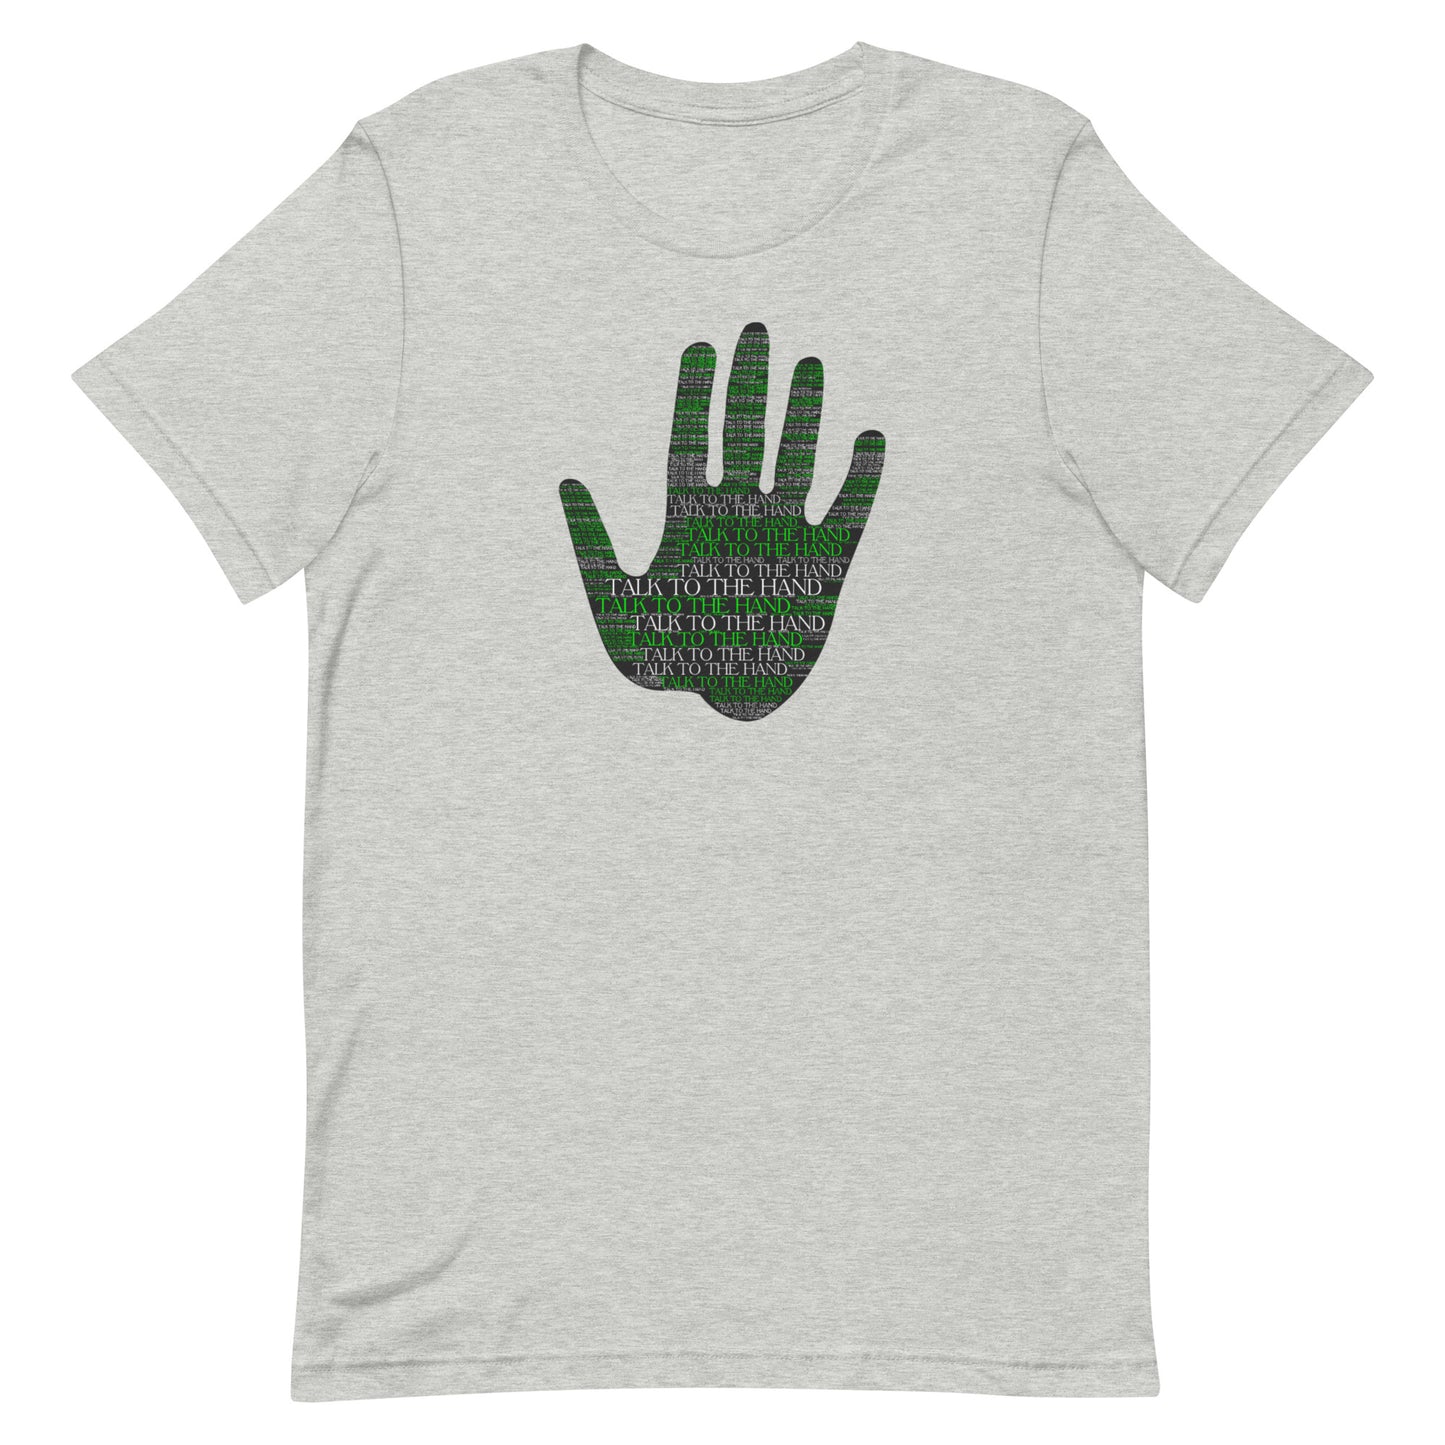 Talk to the Hand - LIME - S-4XL